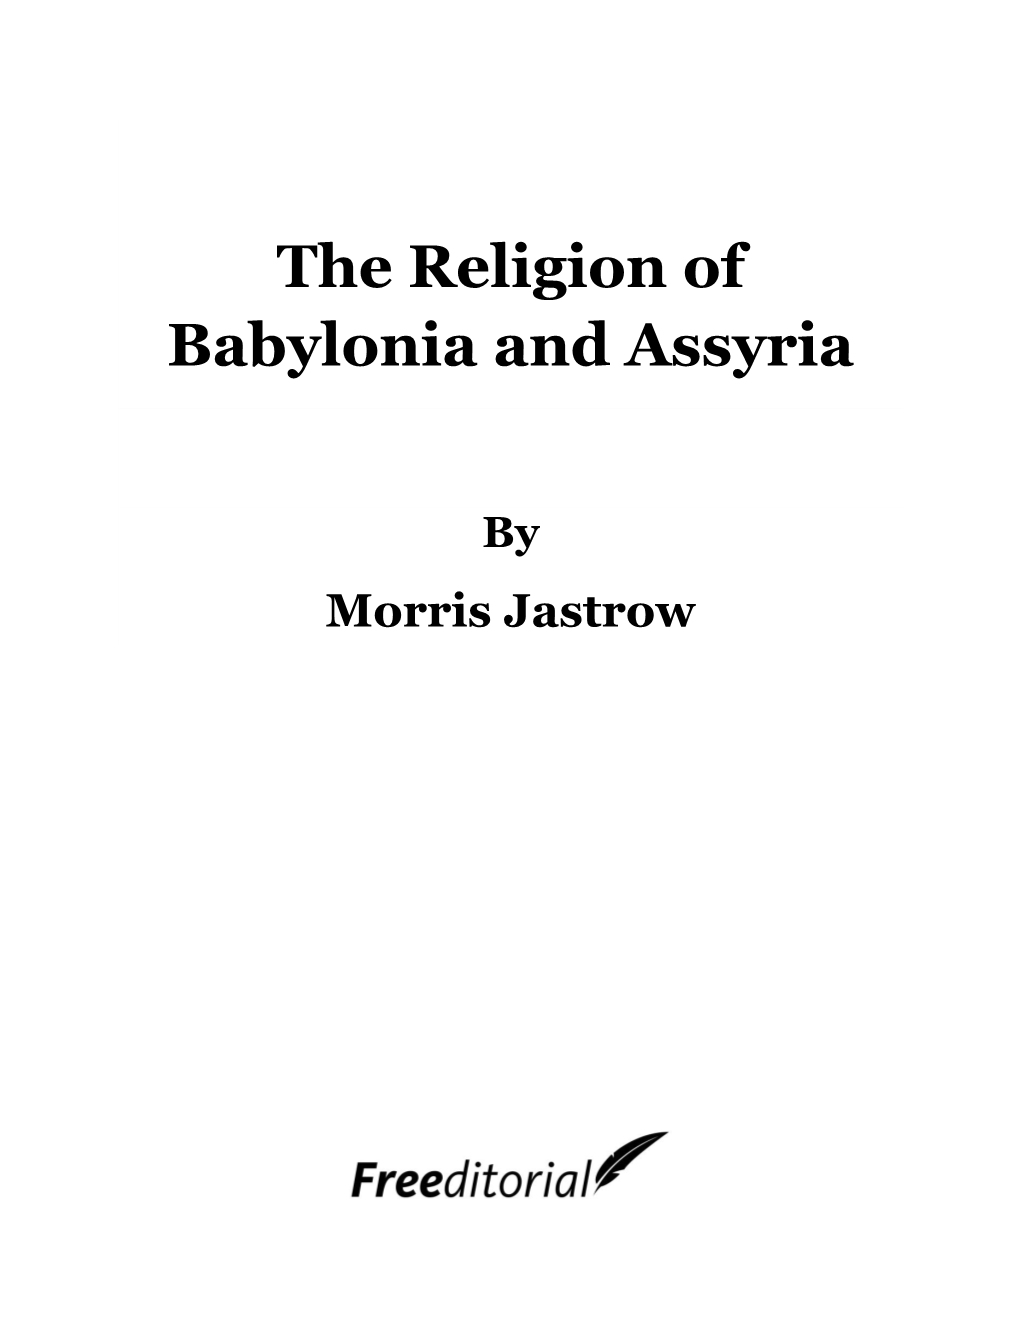 The Religion of Babylonia and Assyria